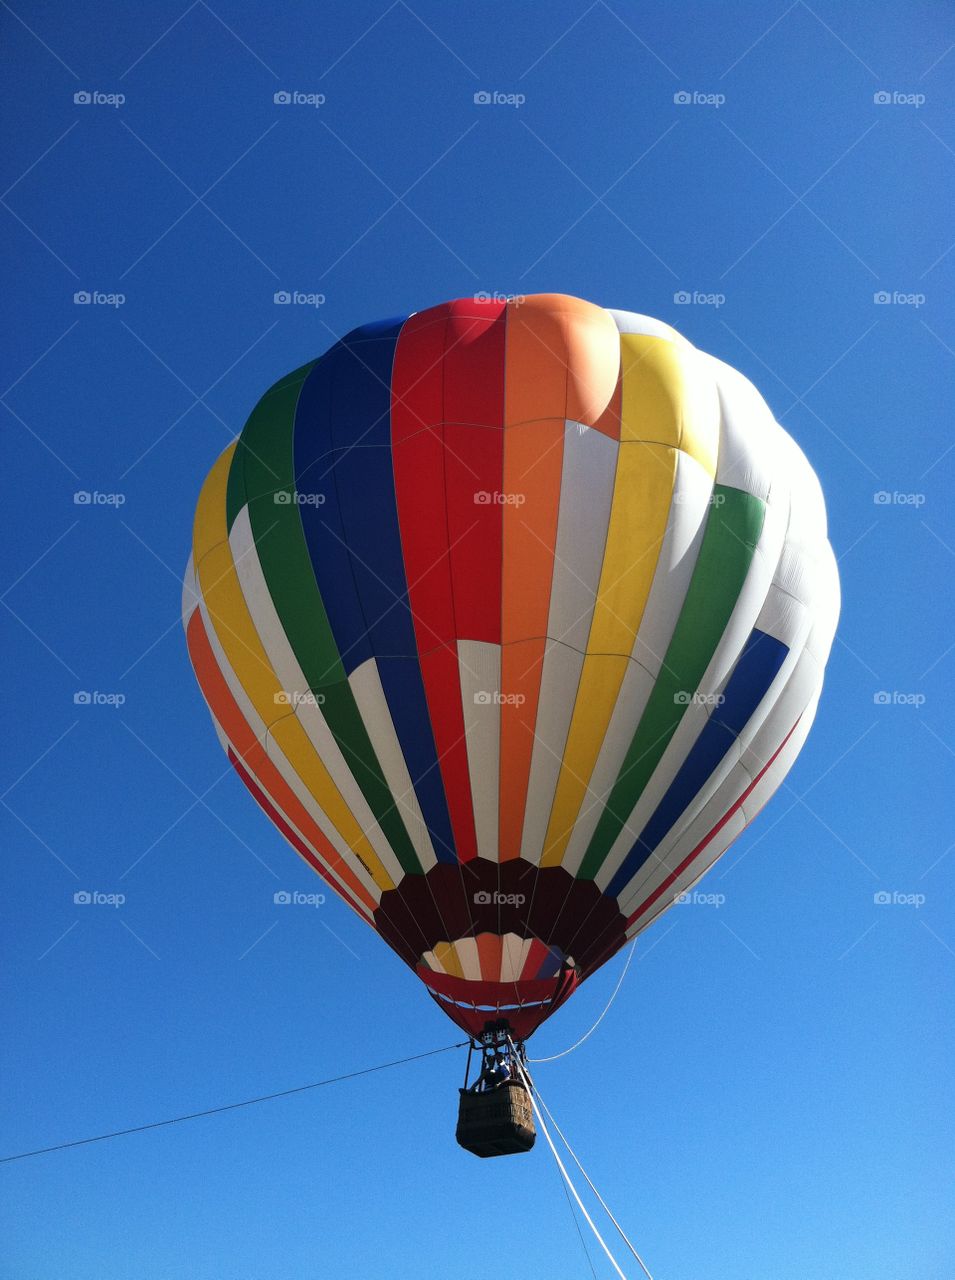 Up Up And Away in a Hot Air Balloon 